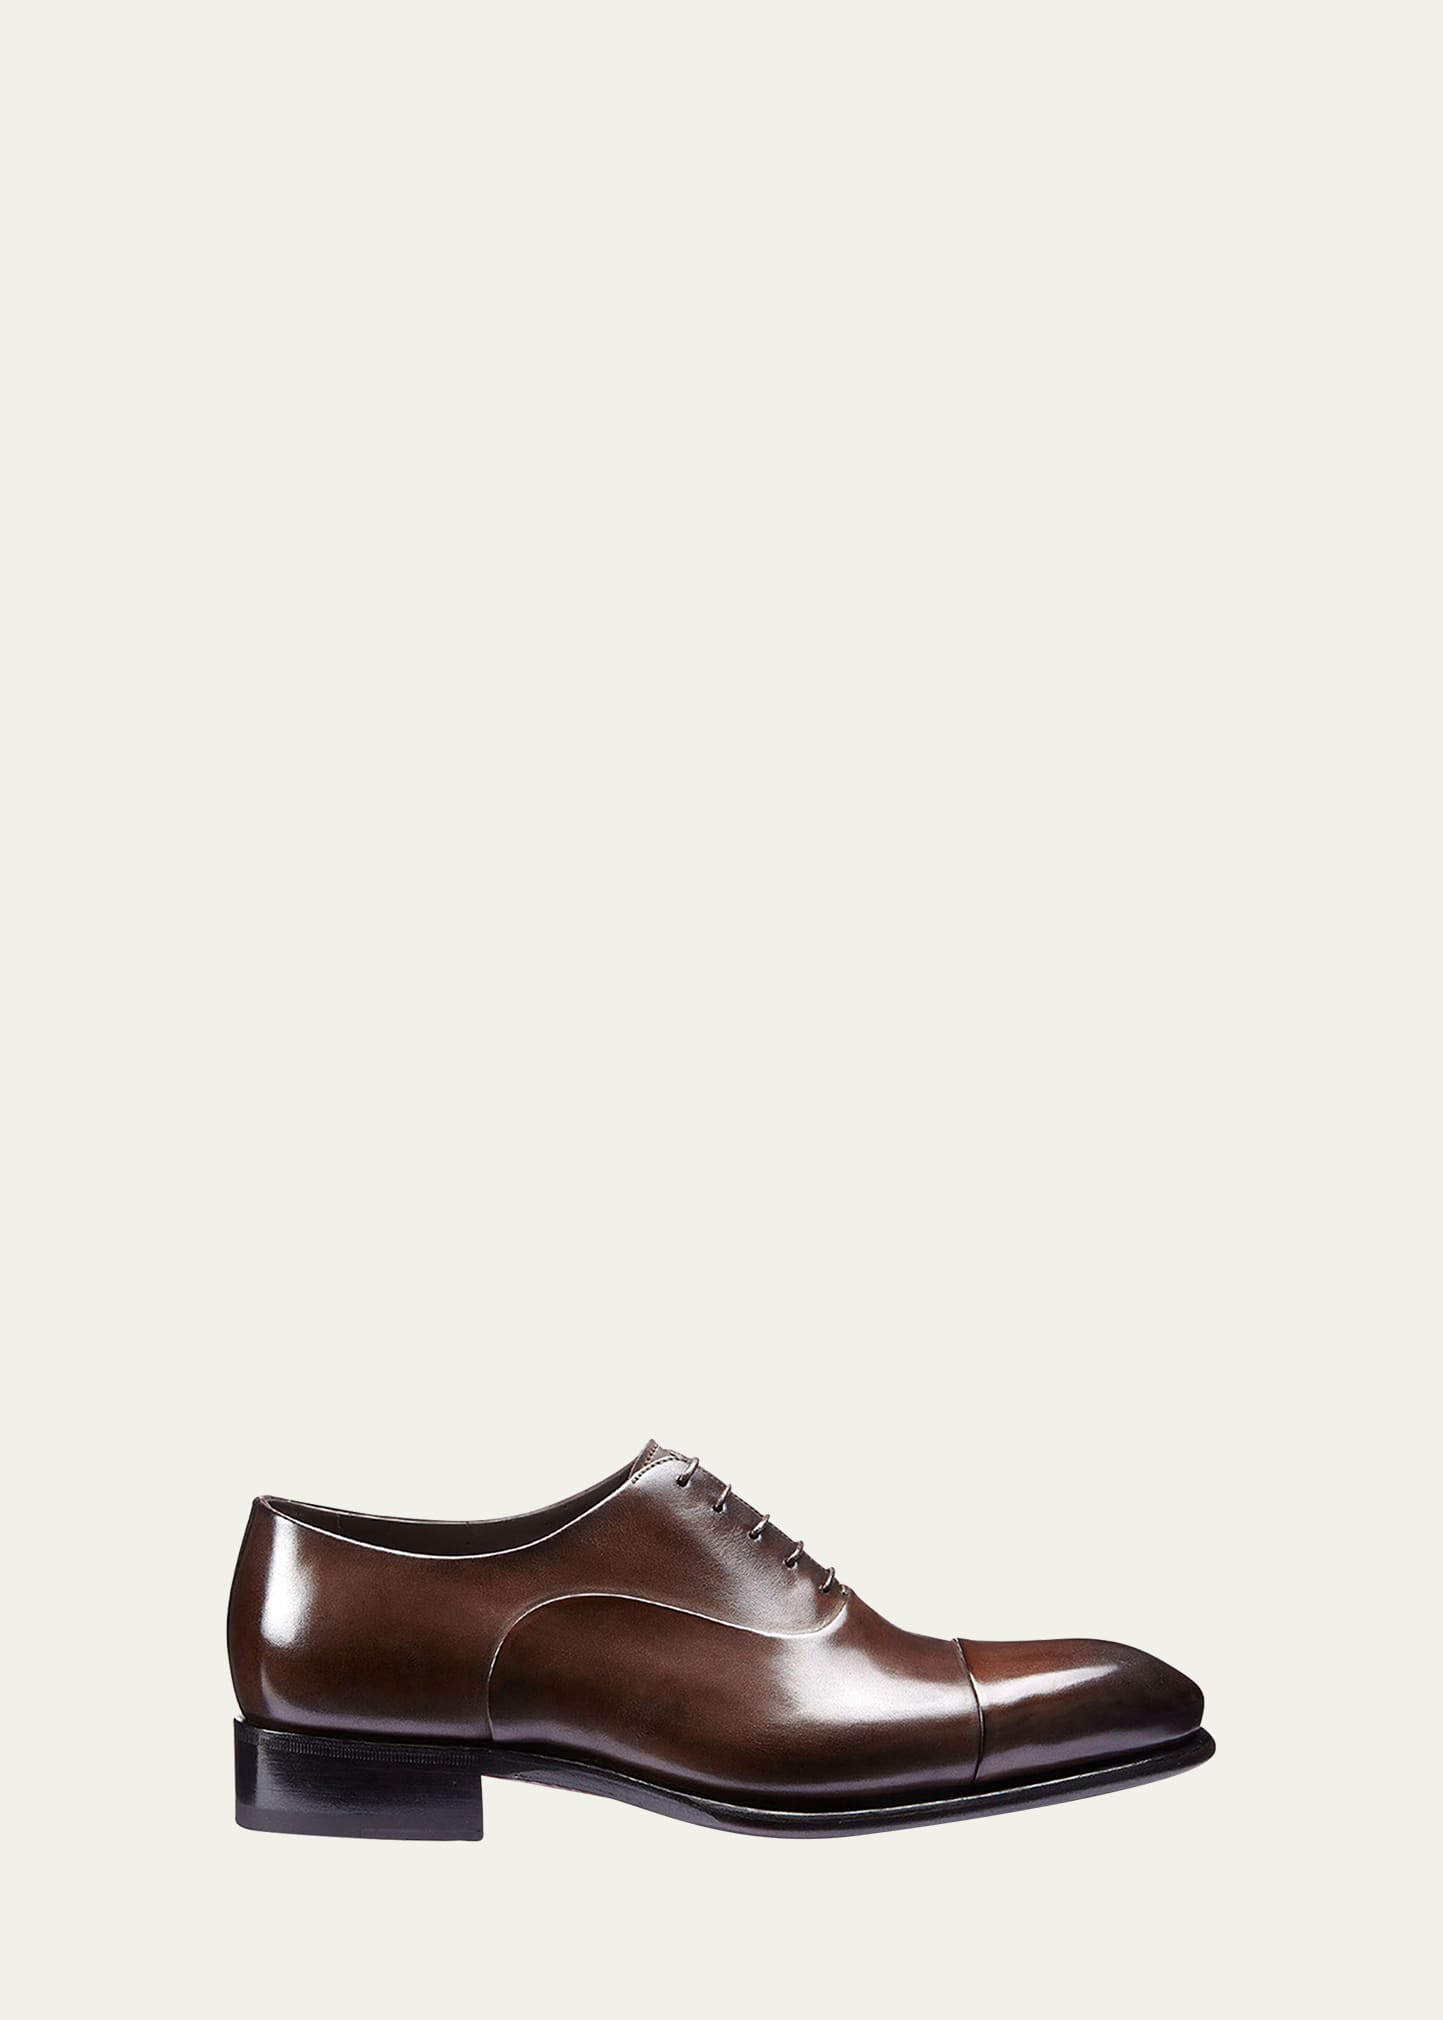 Men's Isaac Cap-Toe Leather Oxford Shoes